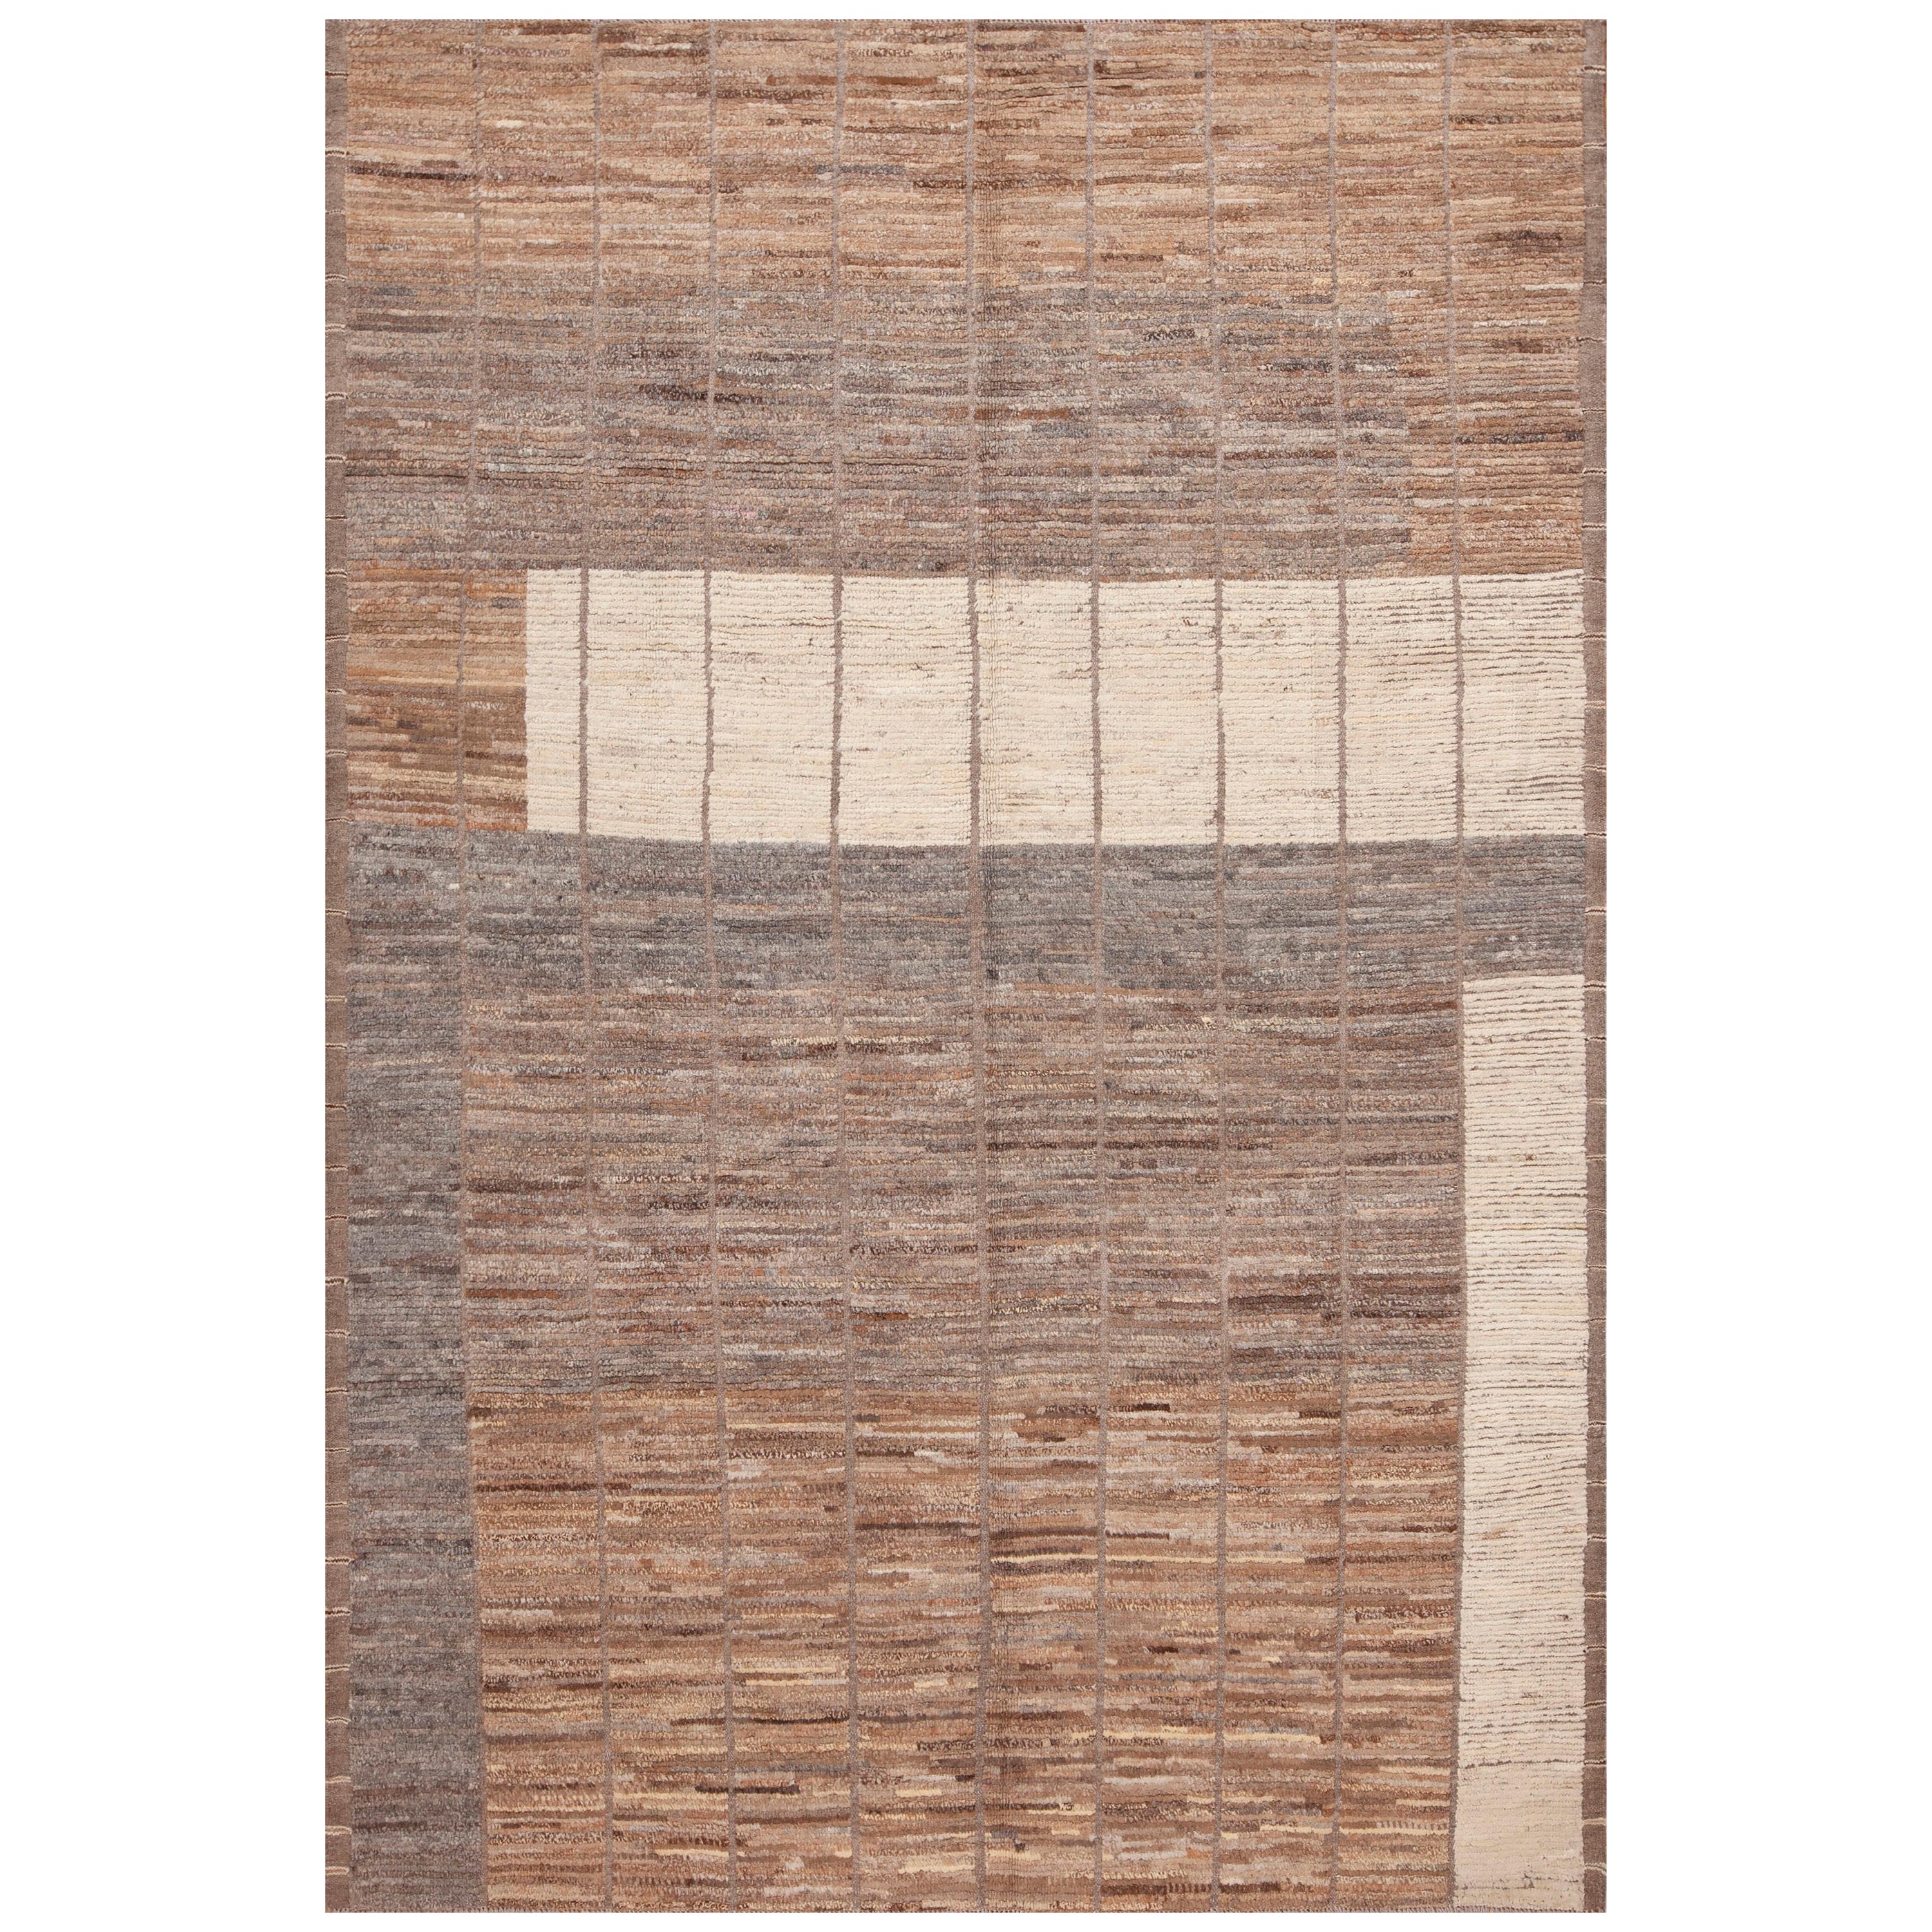 Nazmiyal Collection Neutral Earth Color Modern Contemporary Area Rug 6'2" x 9'1"